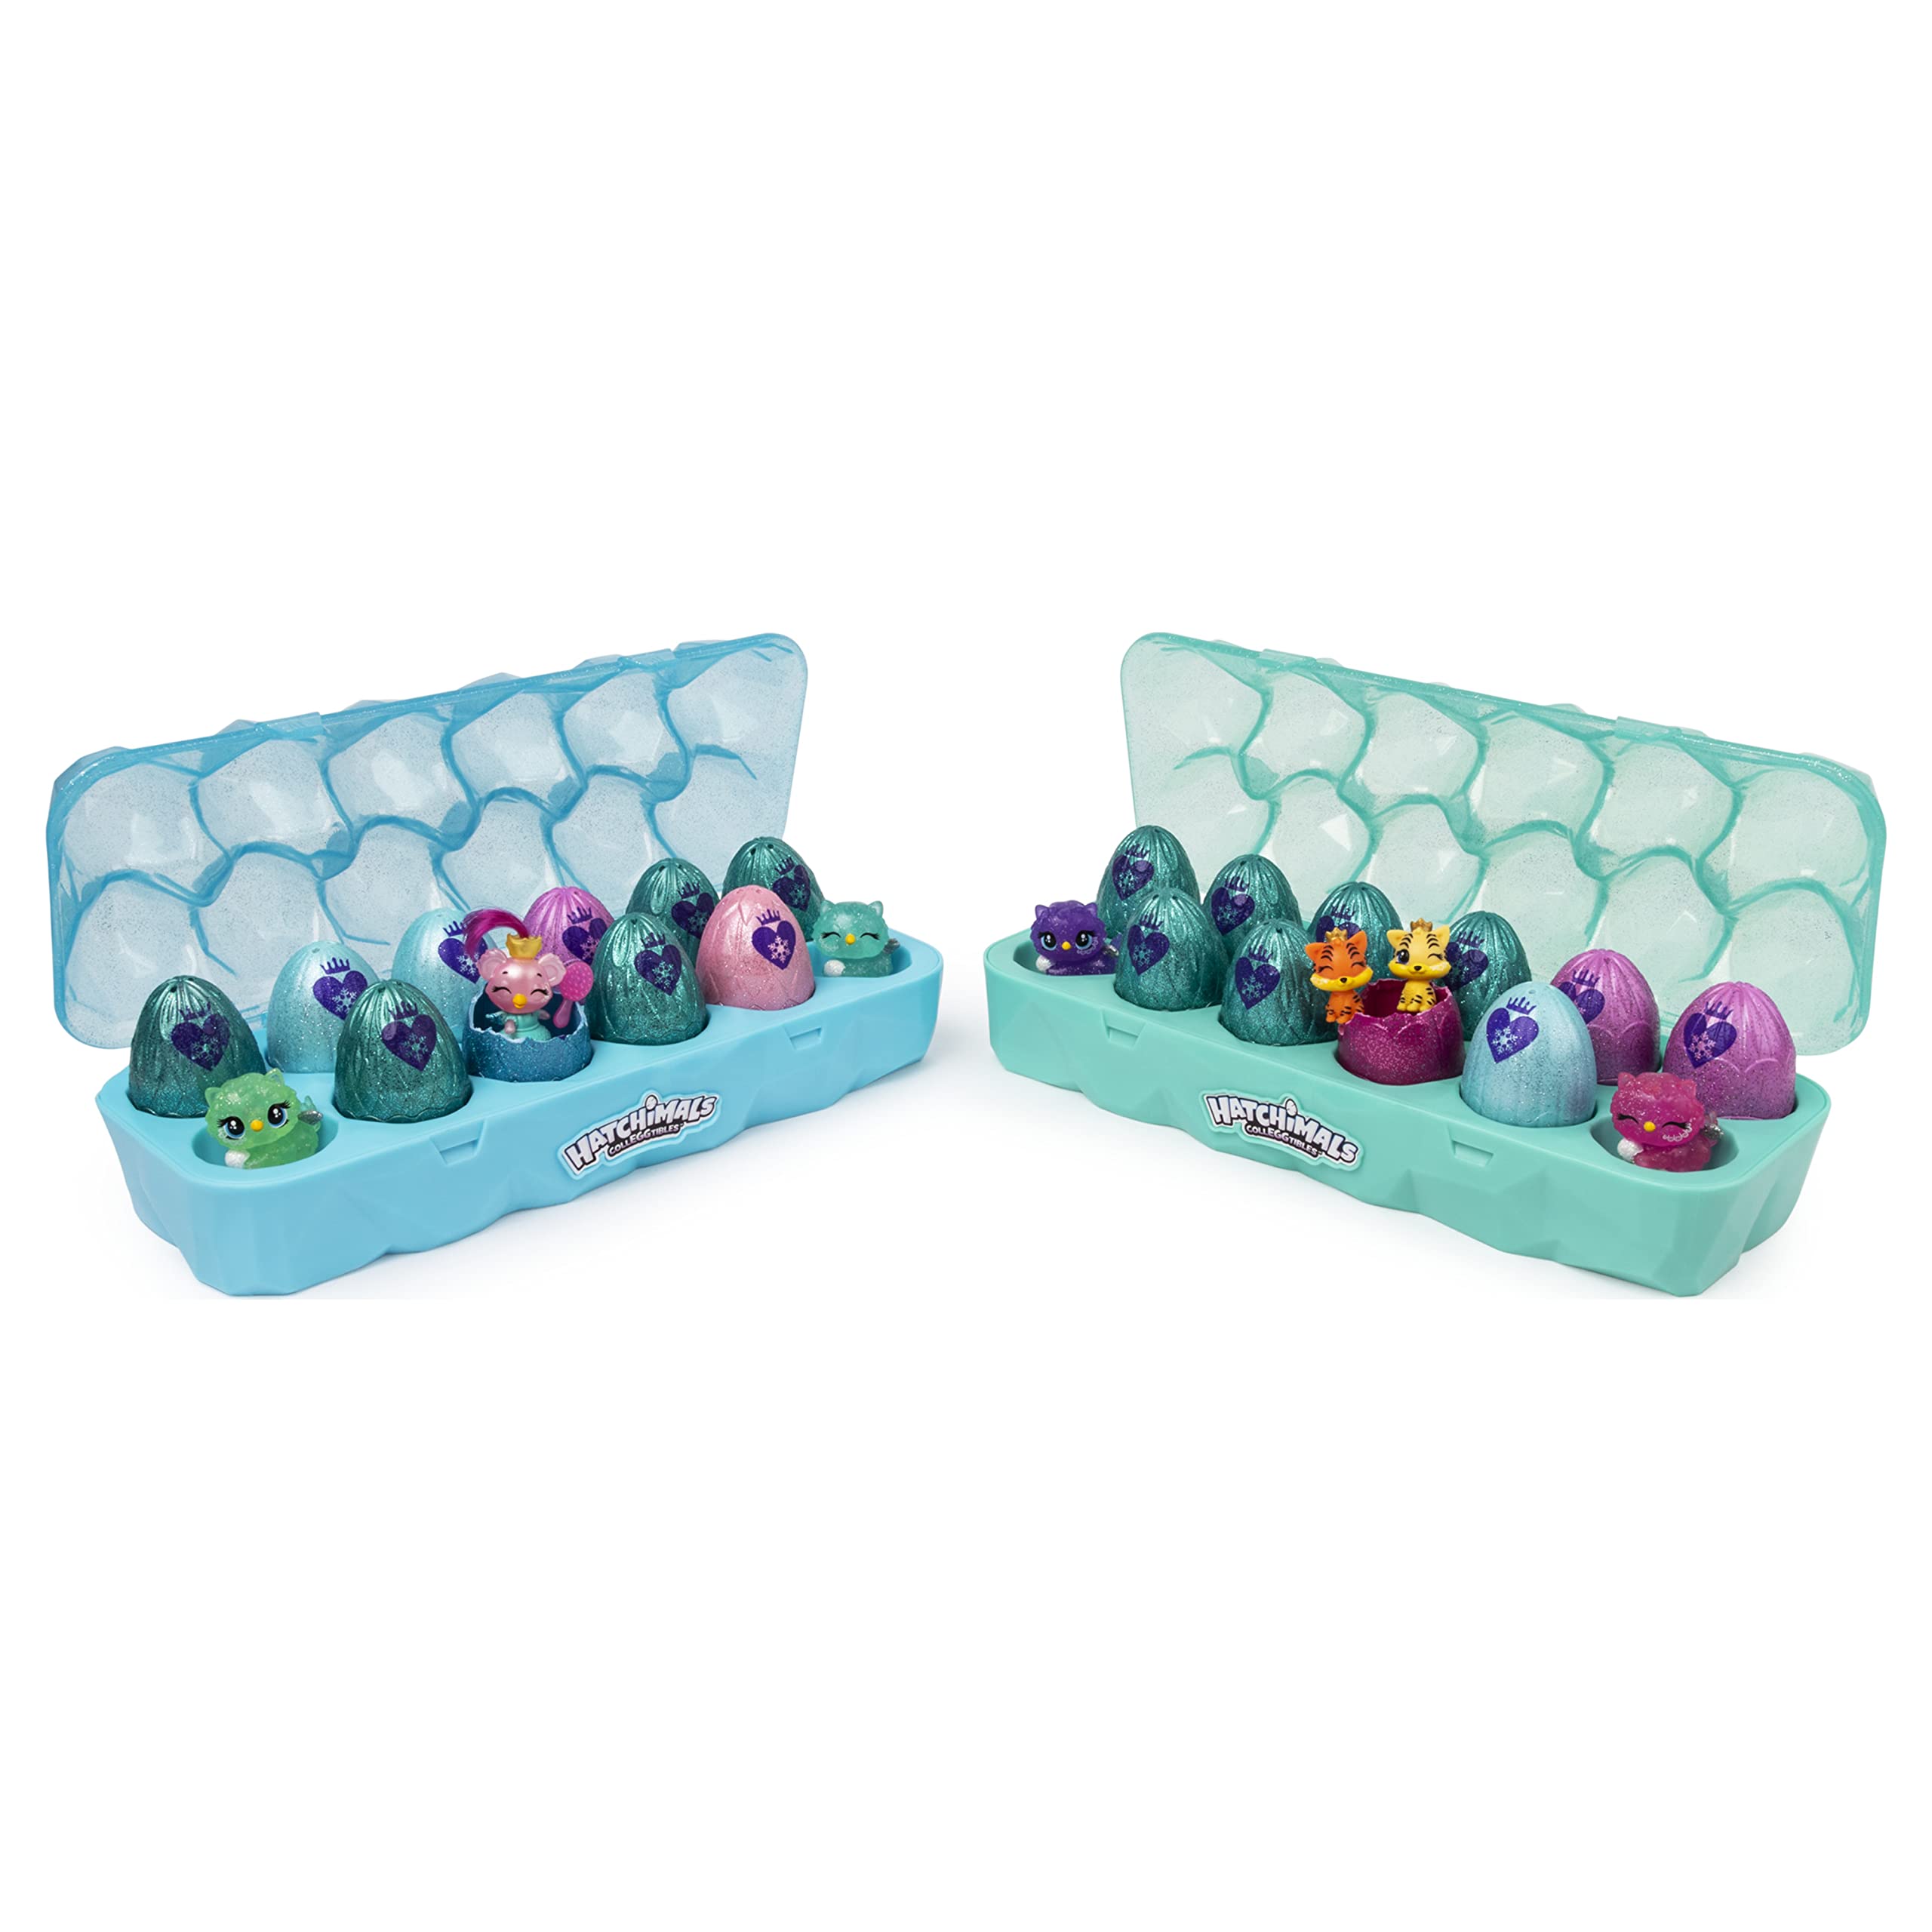 Hatchimals CollEGGtibles, Jewelry Box Royal Dozen 12-Pack Egg Carton with 2 Exclusive (Styles May Vary)